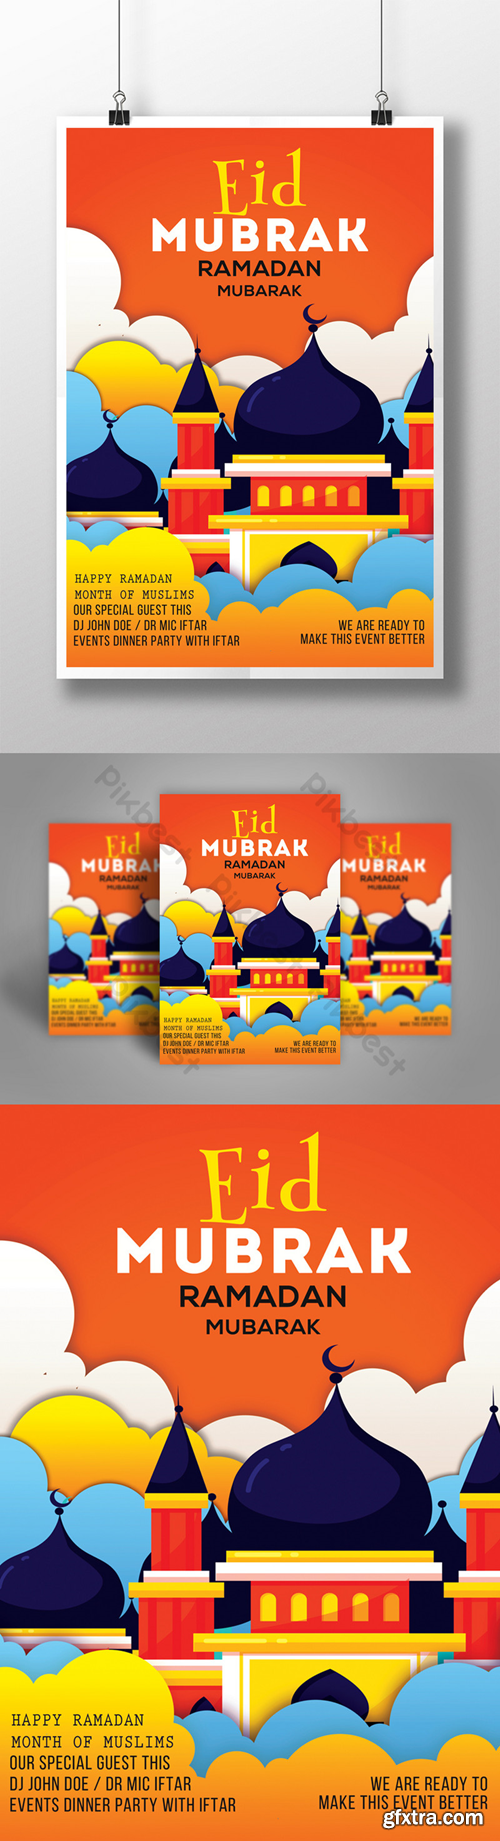 Happy Ramadan Psd Flyer Templates with Mosques in Cartoon Style Template PSD